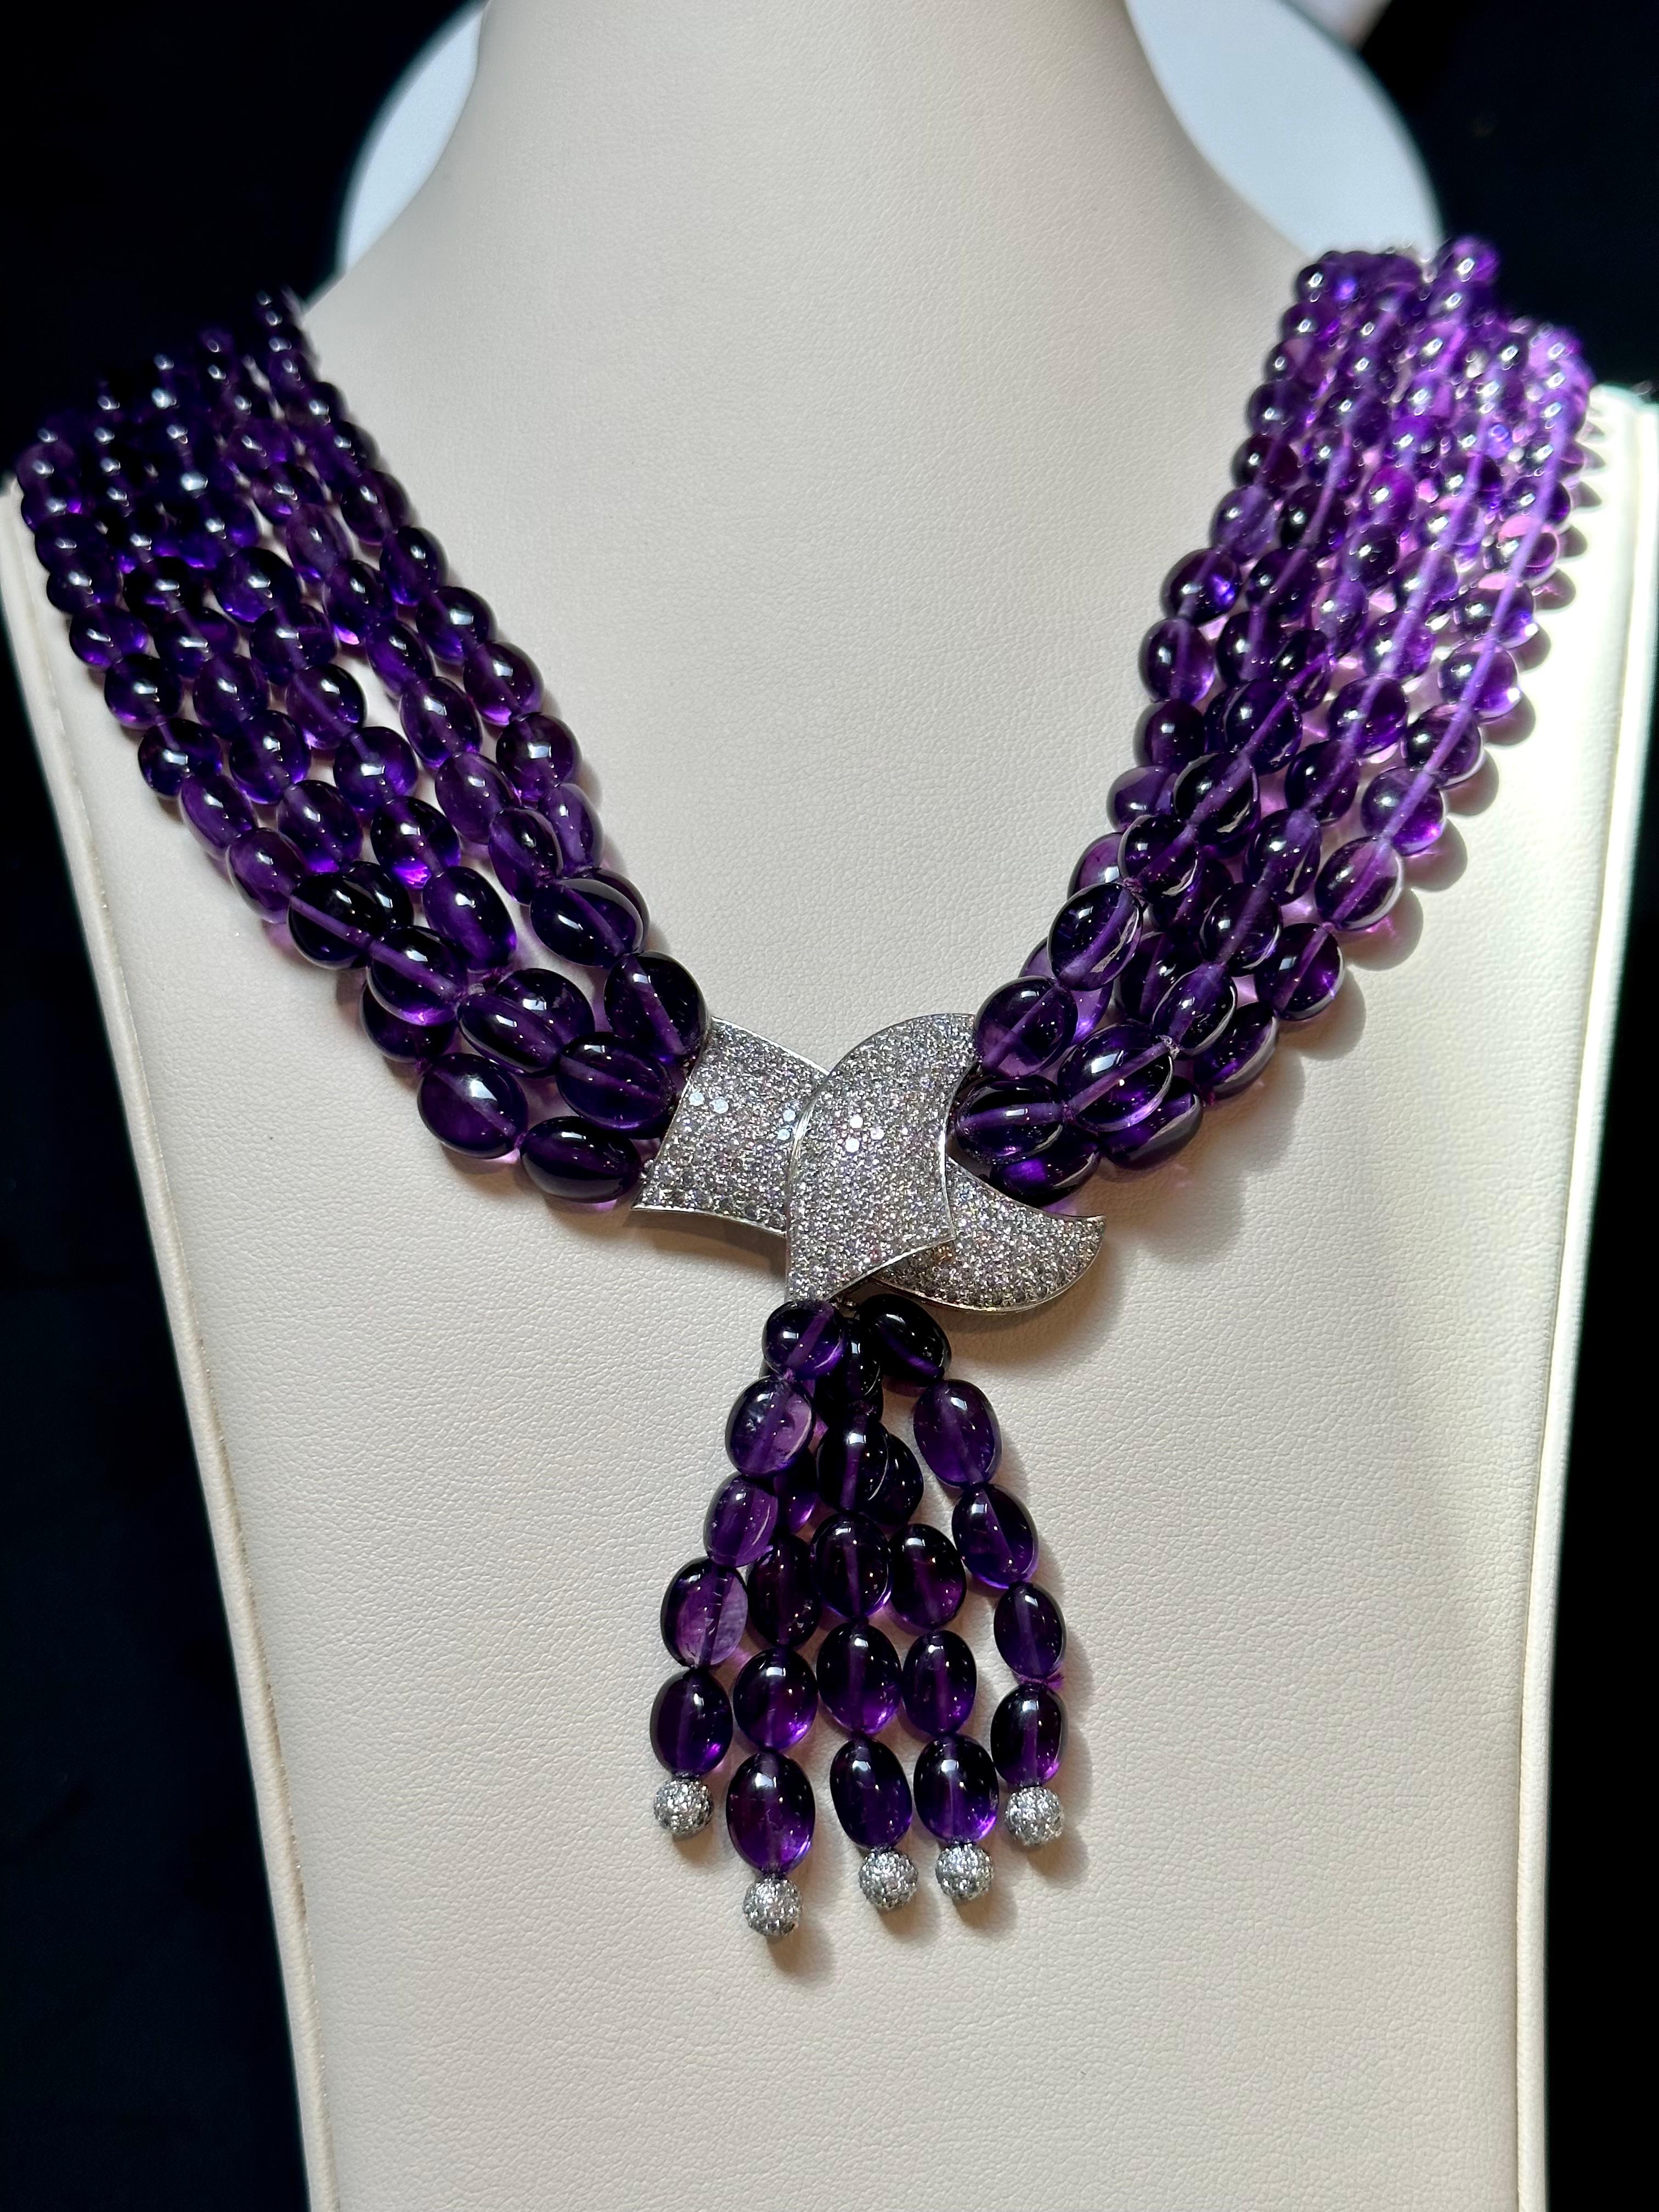 700 Ct Natural Amethyst Multi Layer Bead Necklace in Platinum with 9 Ct Diamonds For Sale 14